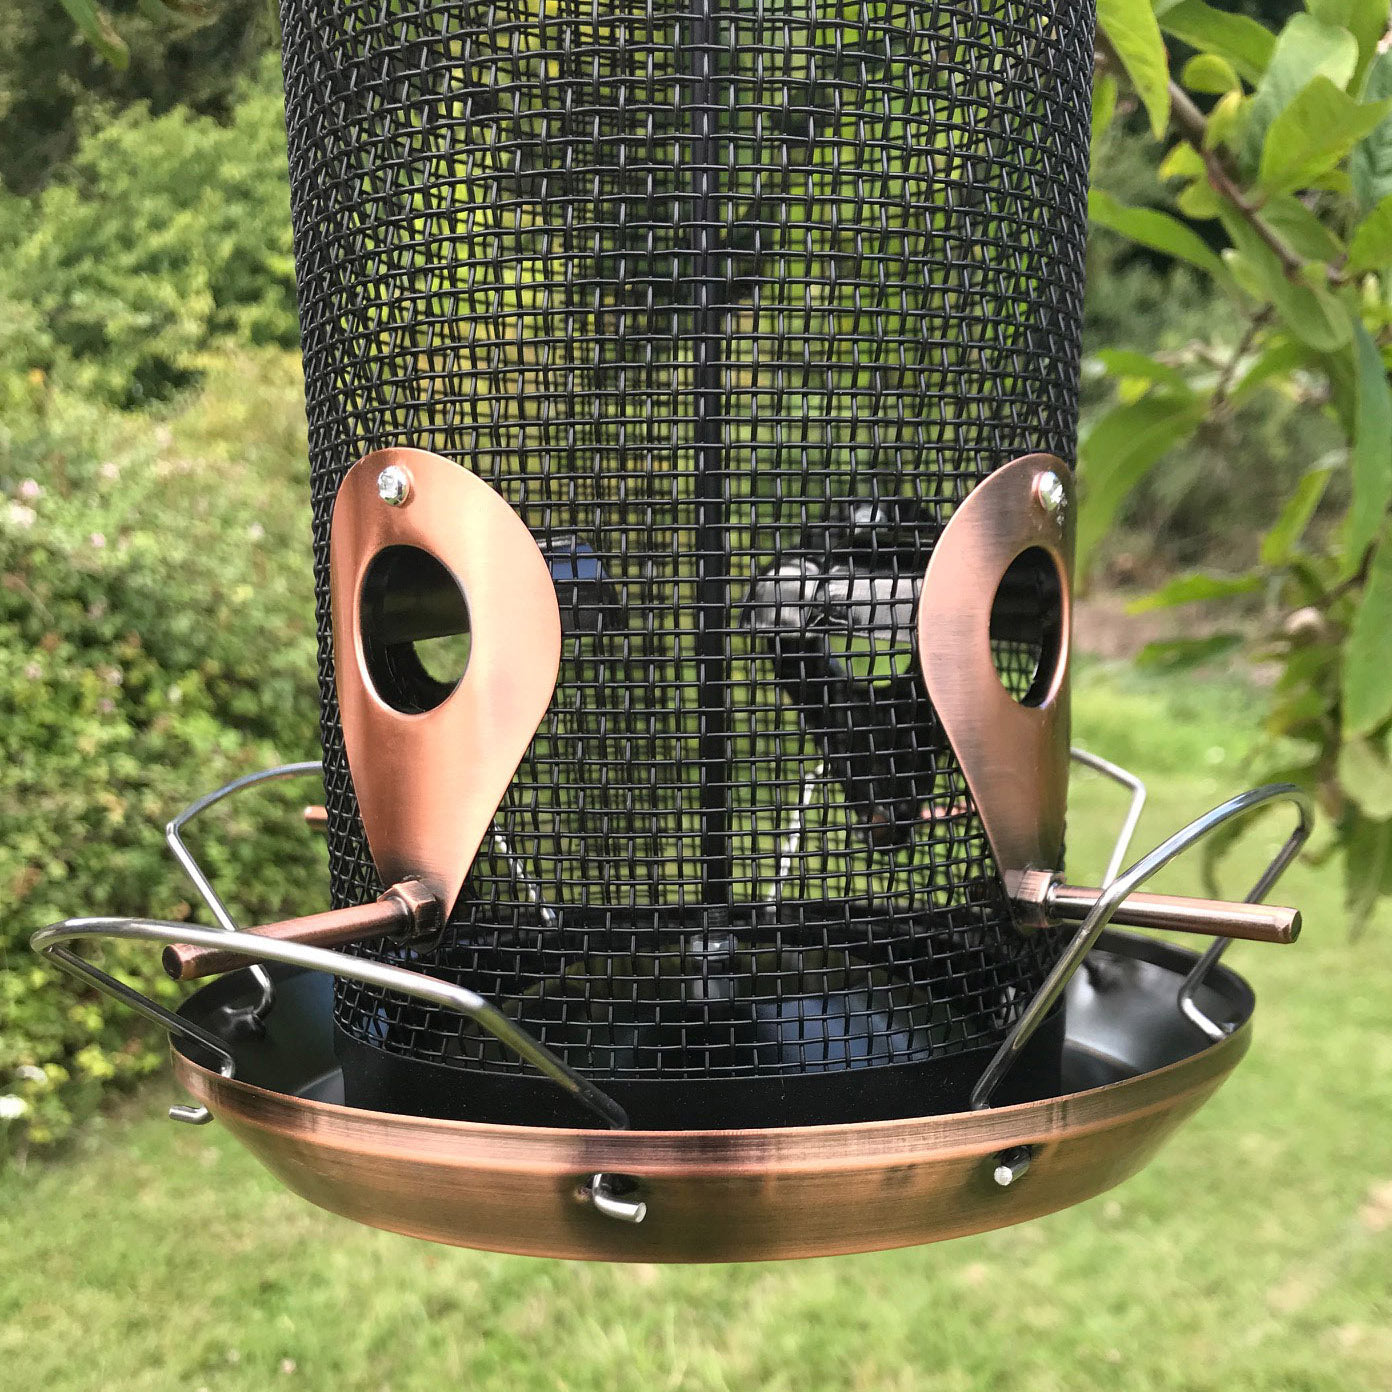 Copper Style Extra Large Hanging Metal Bird Seed Feeder with Seed Catcher Tray